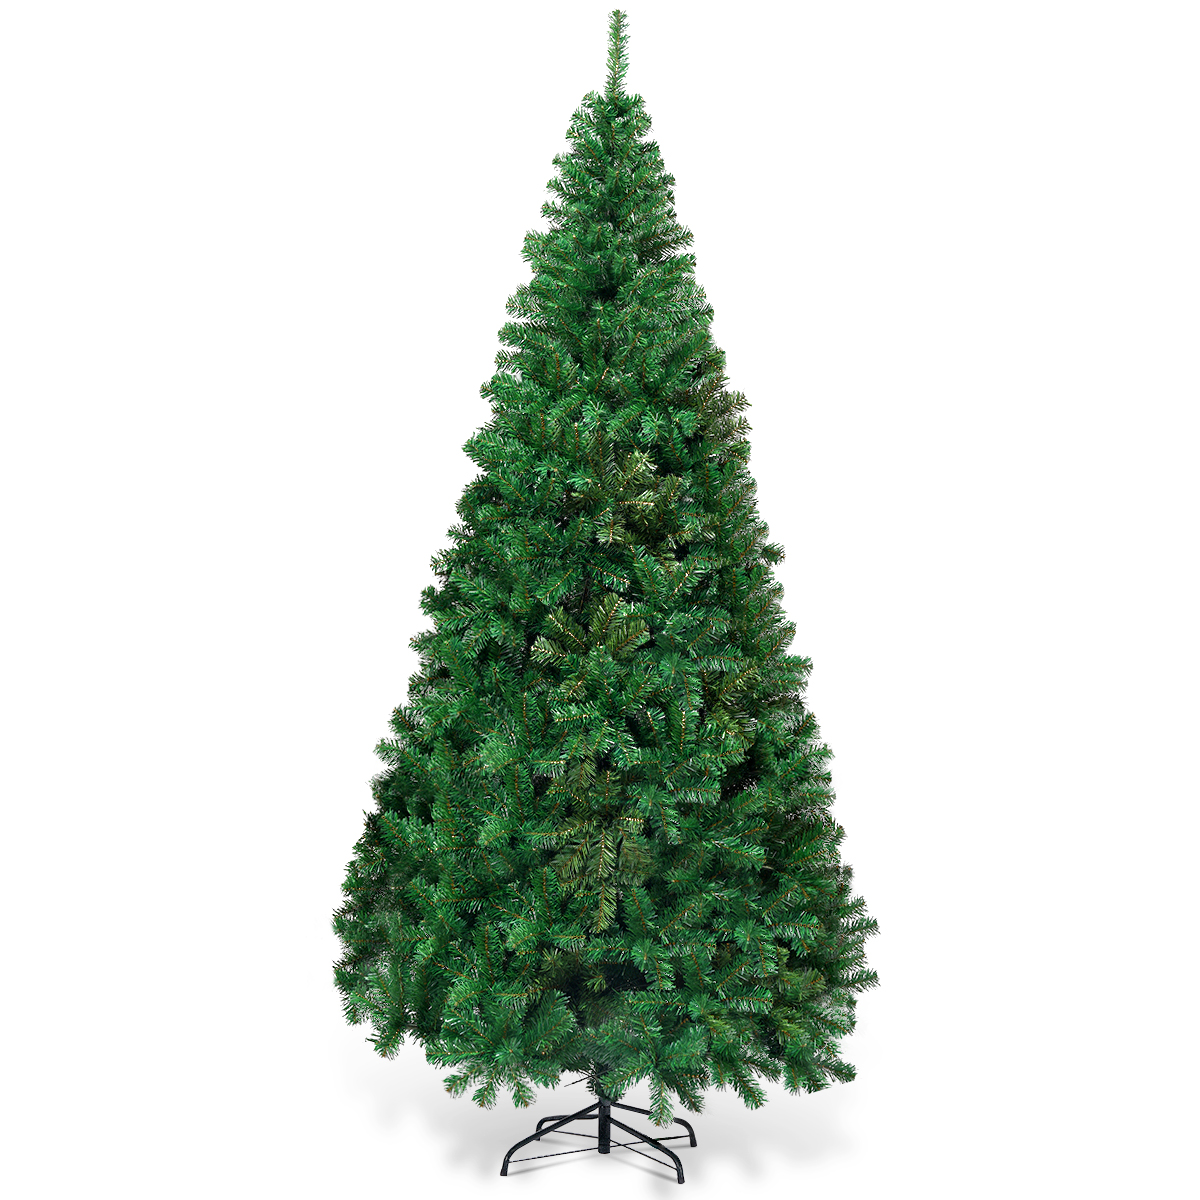 Details about  / 6//7 Ft Christmas Tree No Light W//Stand /& Decor Artificial Holiday In//Outdoor US